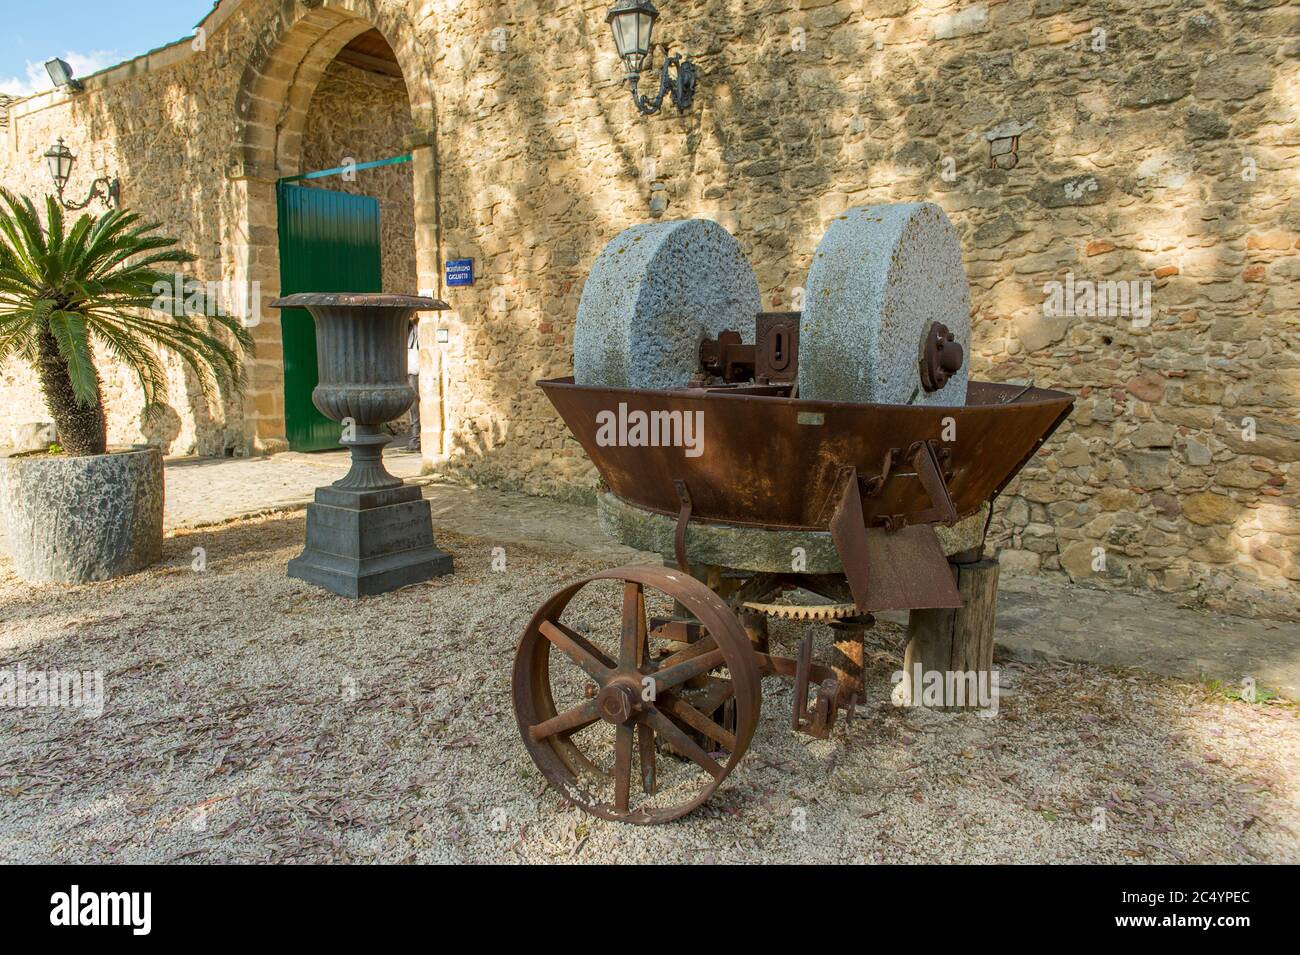 Old farming equipment on display of the hotel Agriturismo Gigliotto Piazza Armerina, which is an ancient XIII century farmhouse near Piazza Armerina o Stock Photo